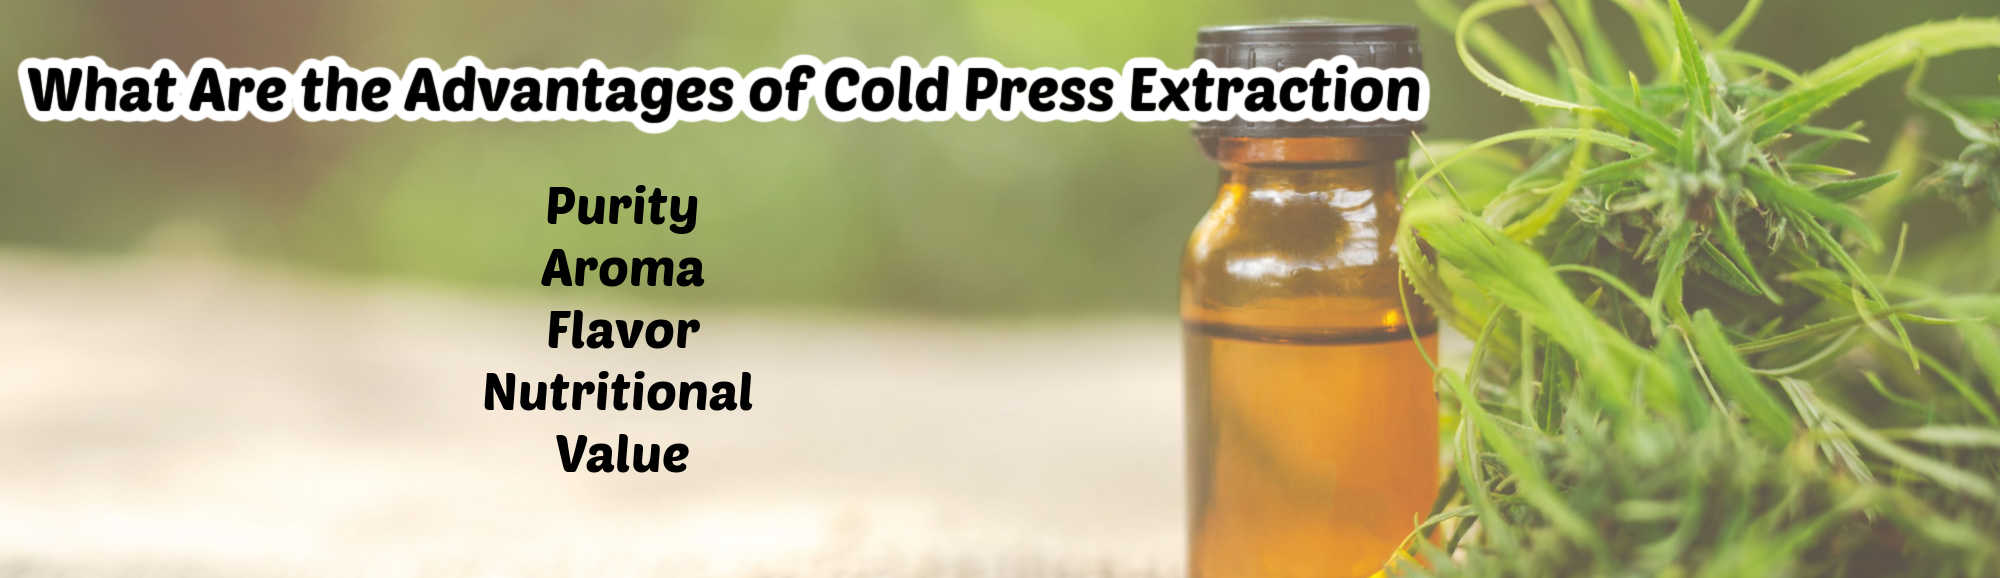 image of what are the advantages of cold press extraction